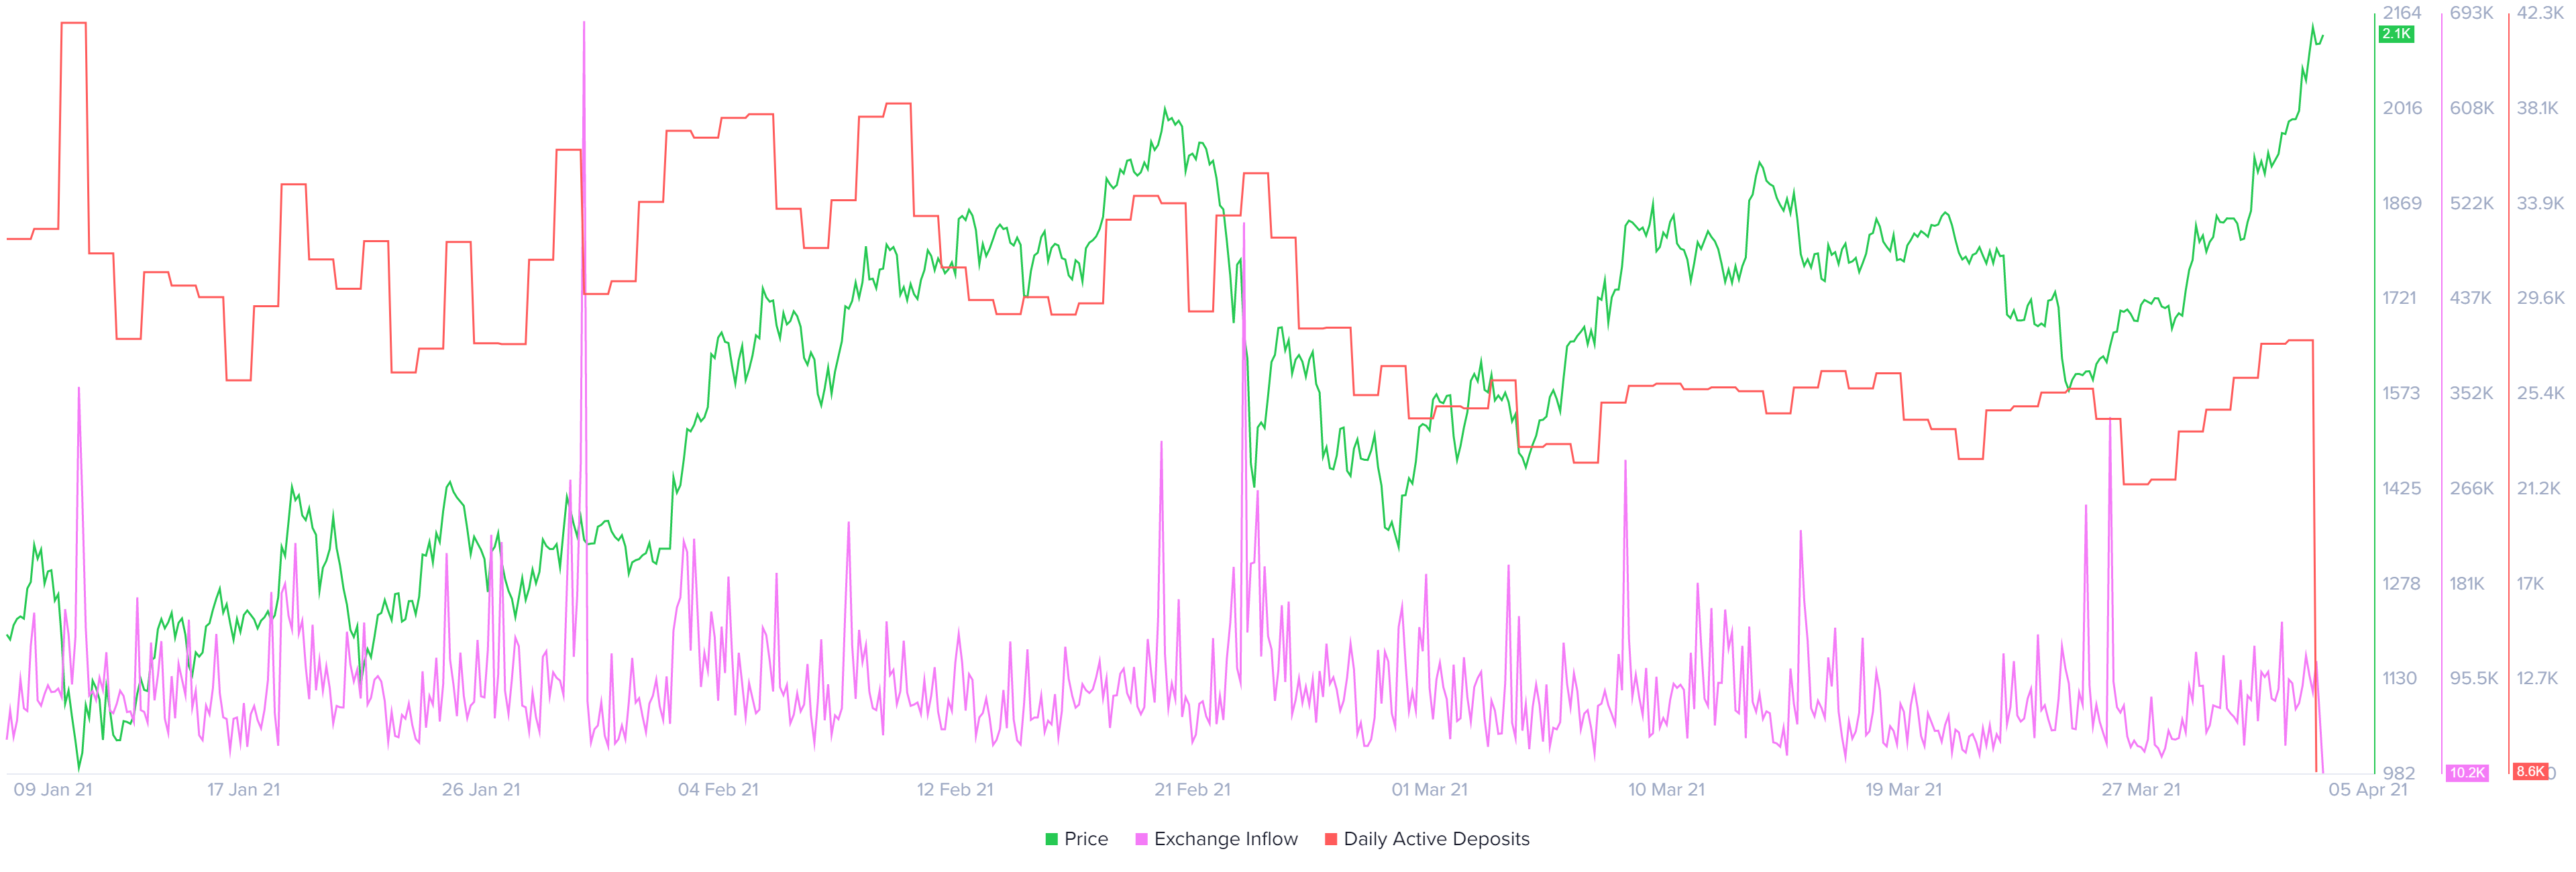 Ethereum daily active deposits and exchange chart